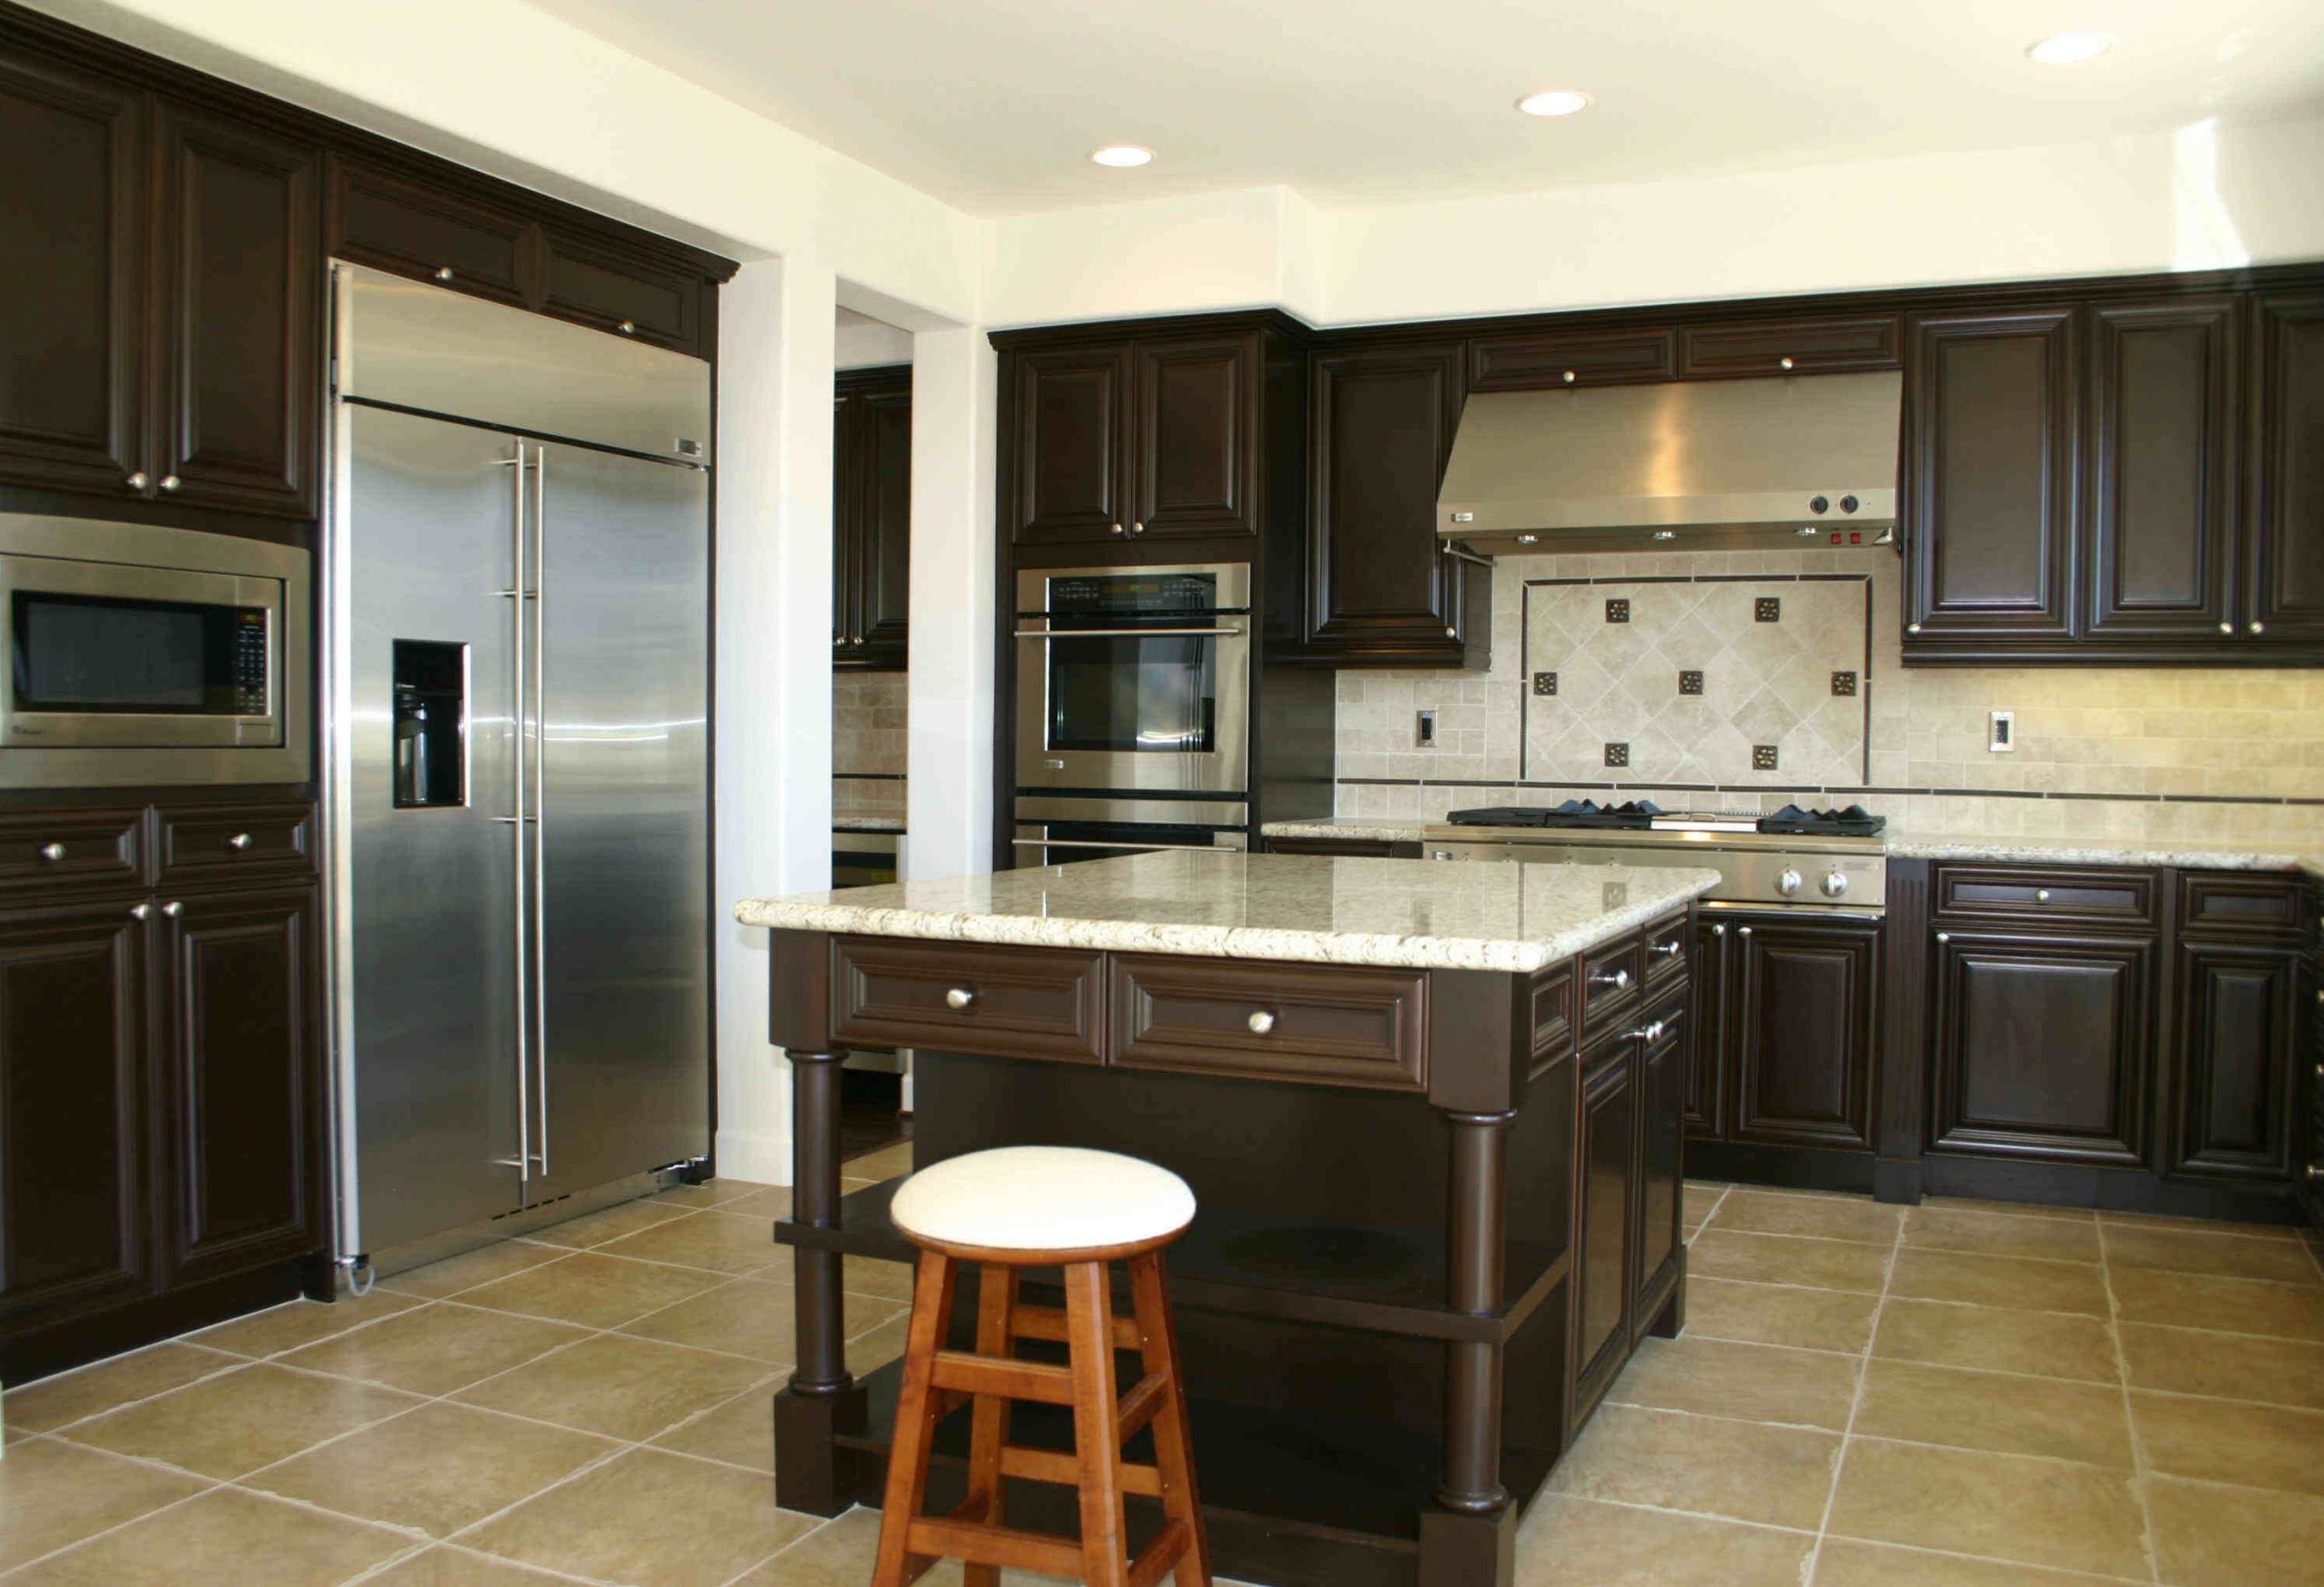 Kitchen Remodeling Blog
 Hire Reputable Kitchen Remodeling Contractors for Quality